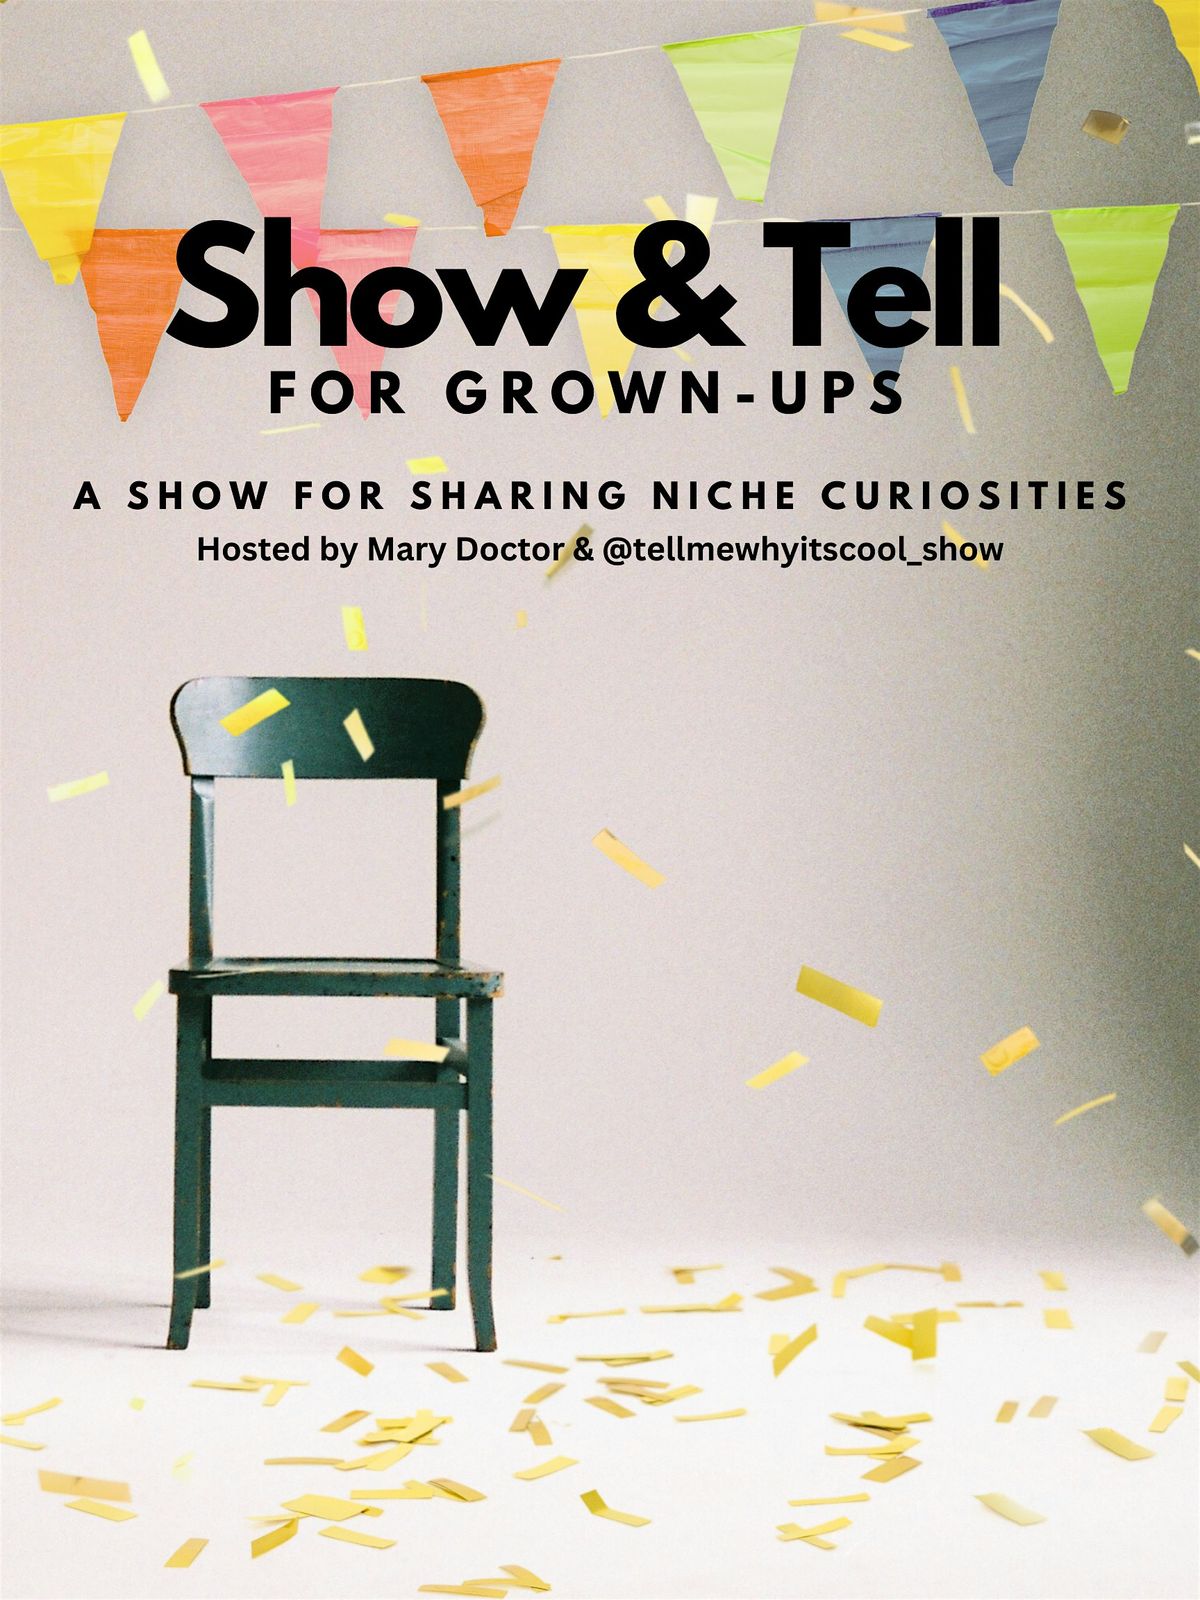 Show & Tell for Grown-Ups: Open Mic @ Uncommon Ground Lakeview